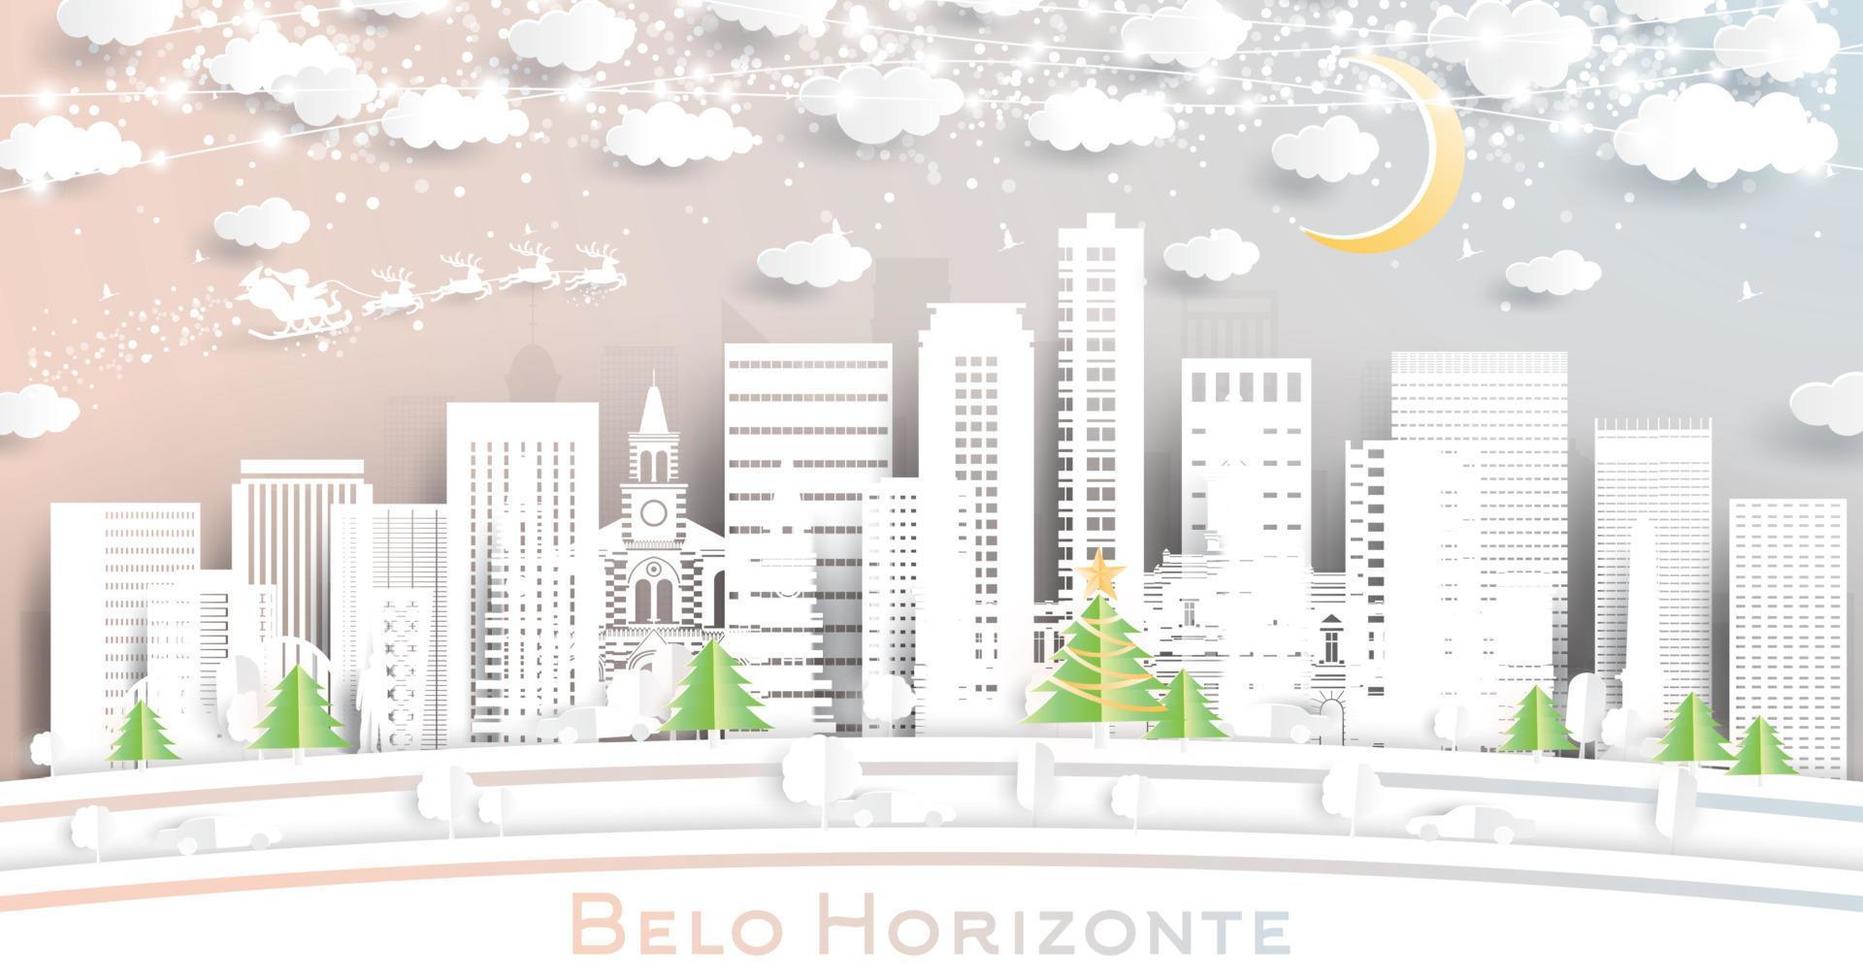 Belo Horizonte Brazil City Skyline in Paper Cut Style with Snowflakes, Moon and Neon Garland. vector